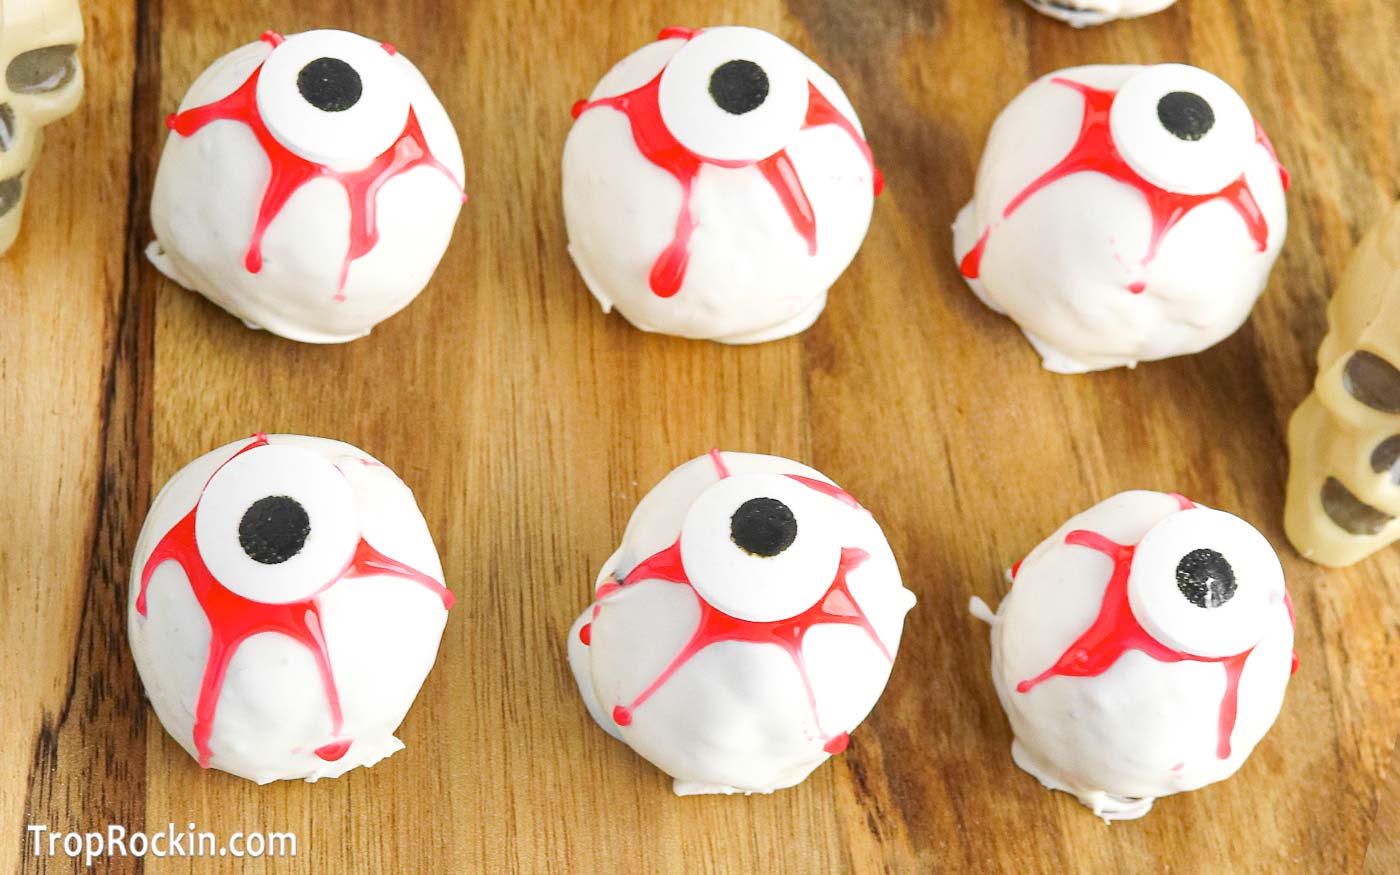 White chocolate coated Oreo eyeballs with red gel streaks and a candy eyeball on top displayed on a wooden cutting board.